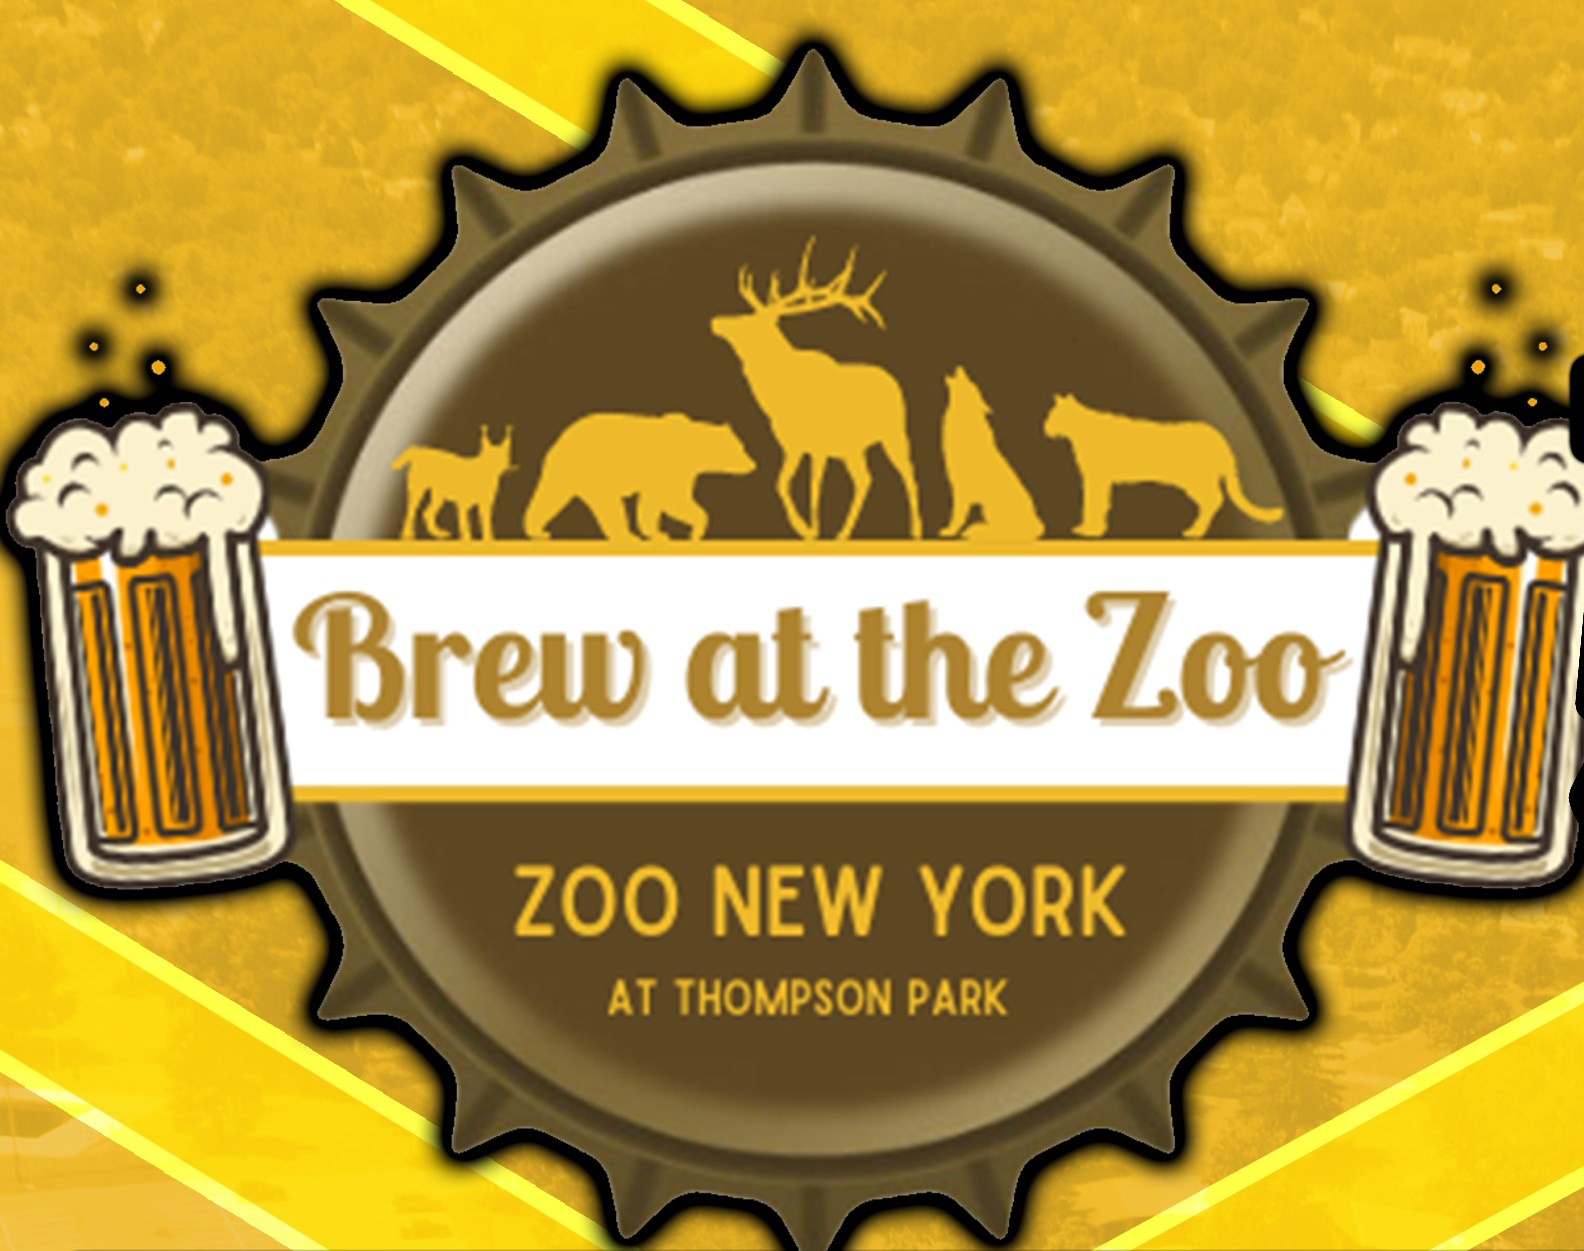 ZOO New York Brew at the Zoo